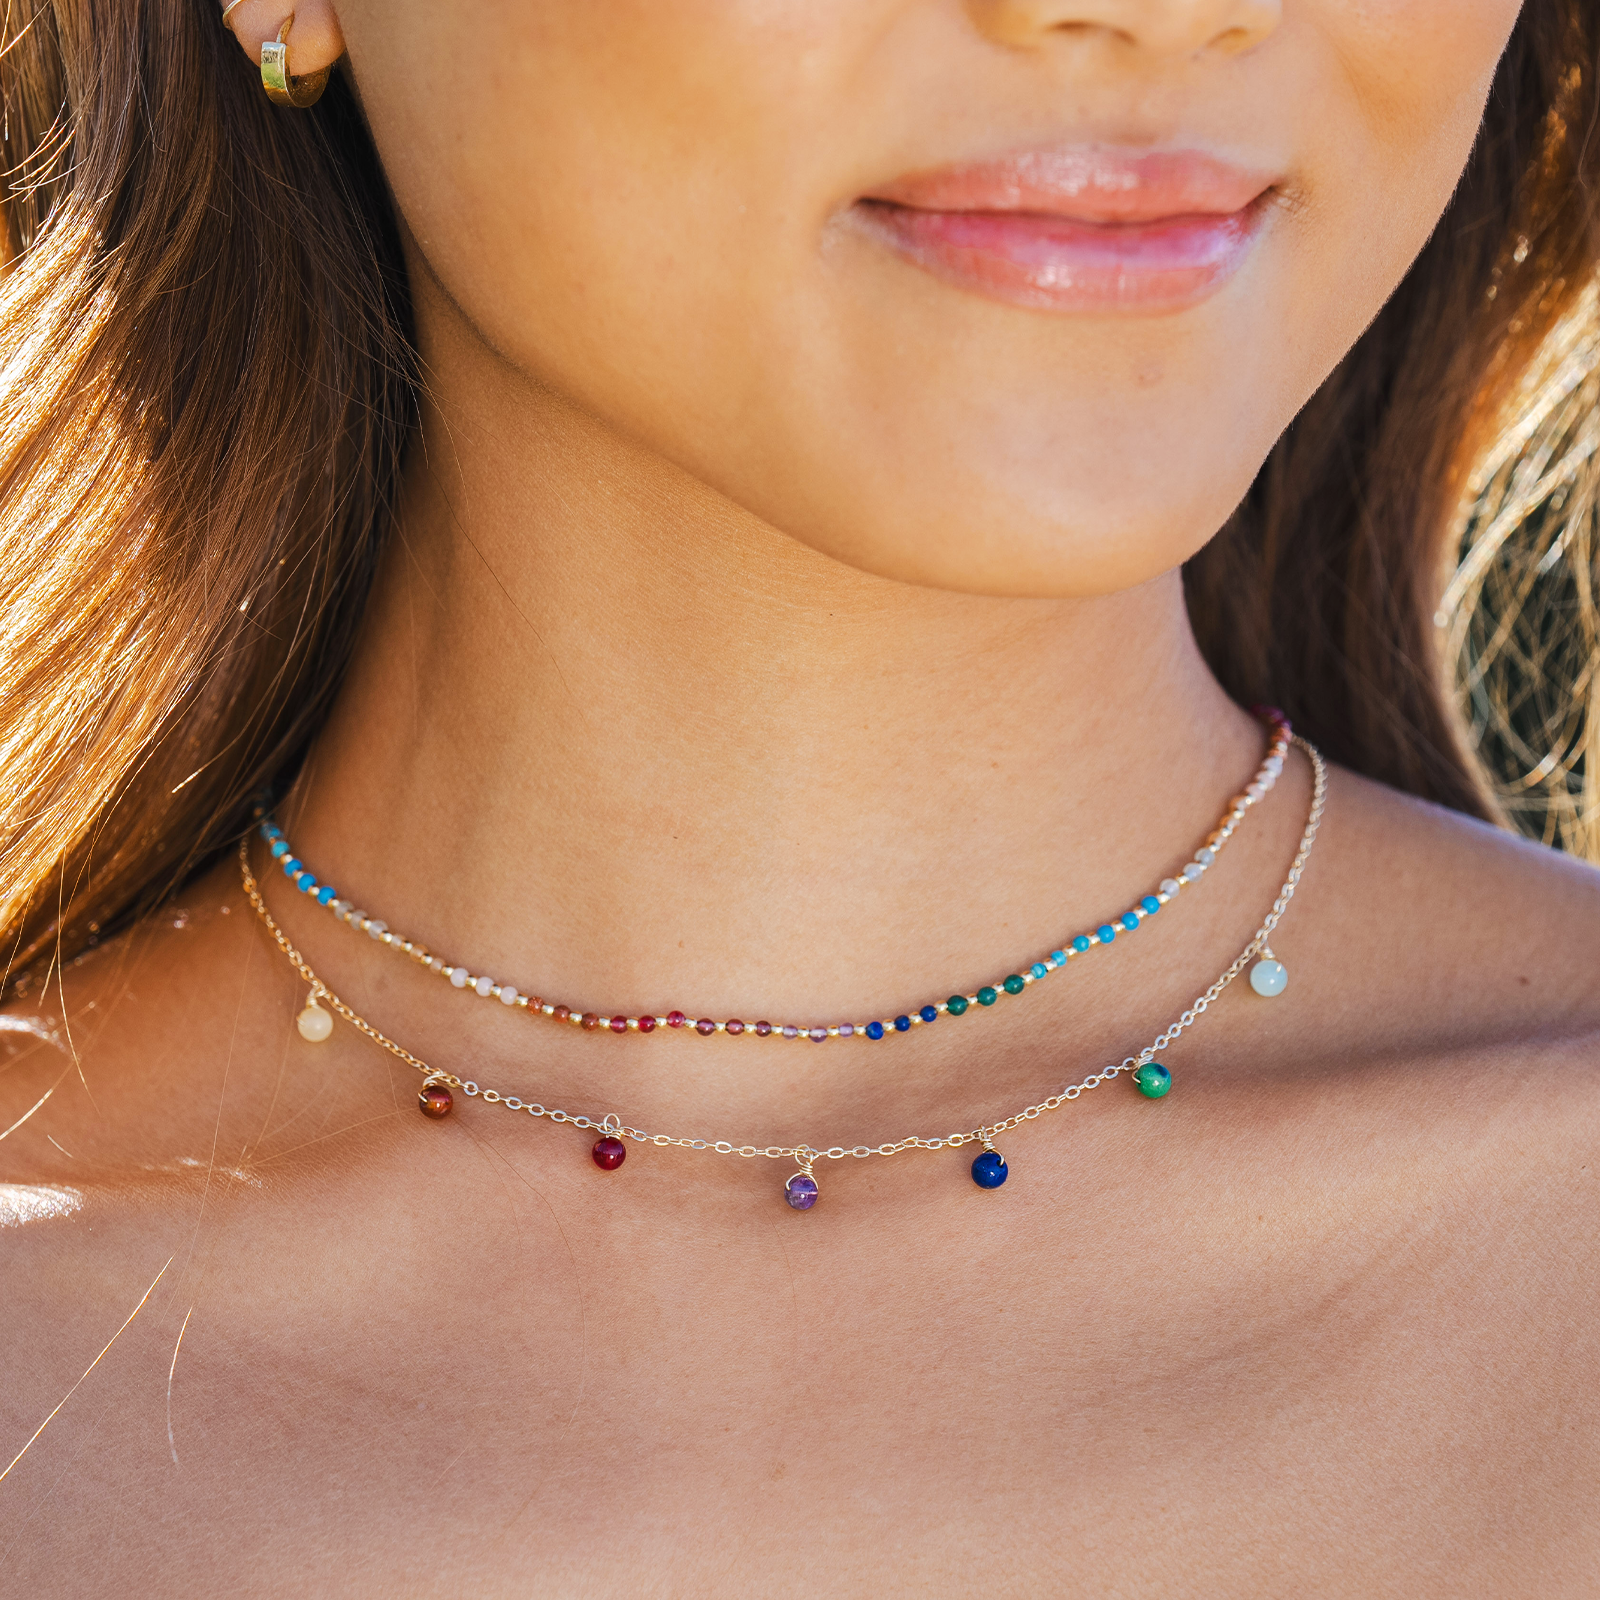 Model wearing a necklace stack. The necklaces include a multicolor stone dewdrop charm healing necklace with a gold chain and a 2mm multicolor stone and gold bead healing necklace